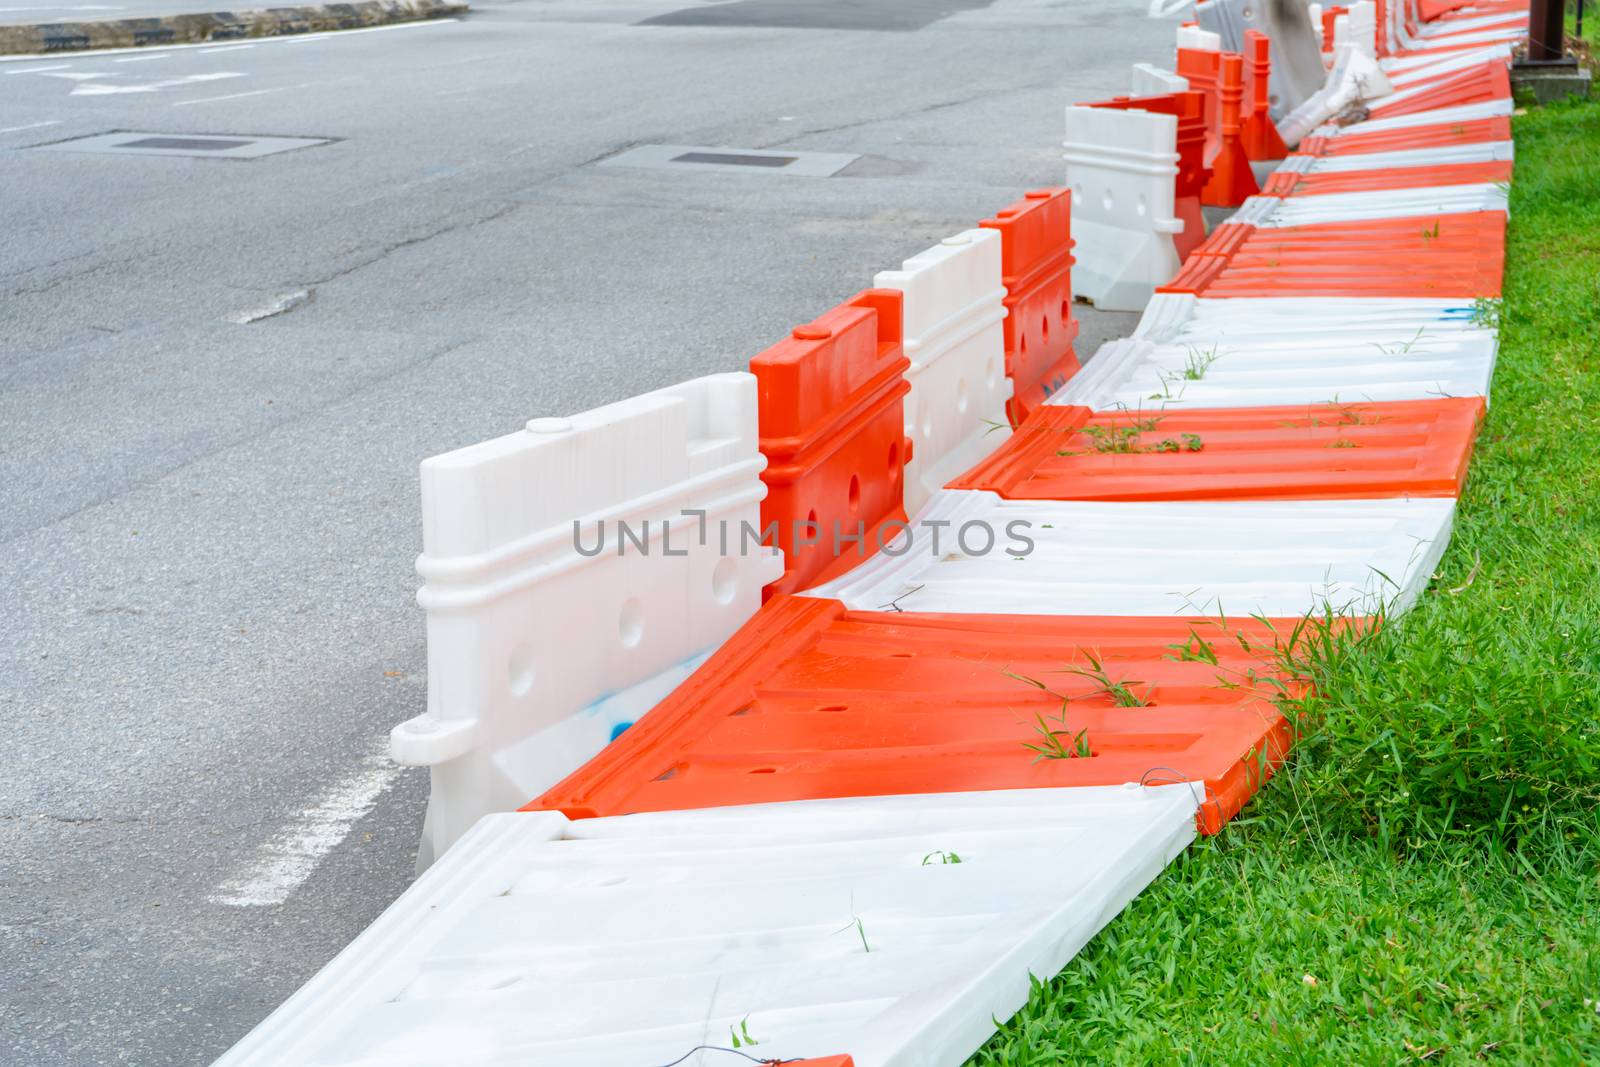 Plastic blocks restricting the passage of cars during repair work. Safe Plastic Road Fences by Try_my_best